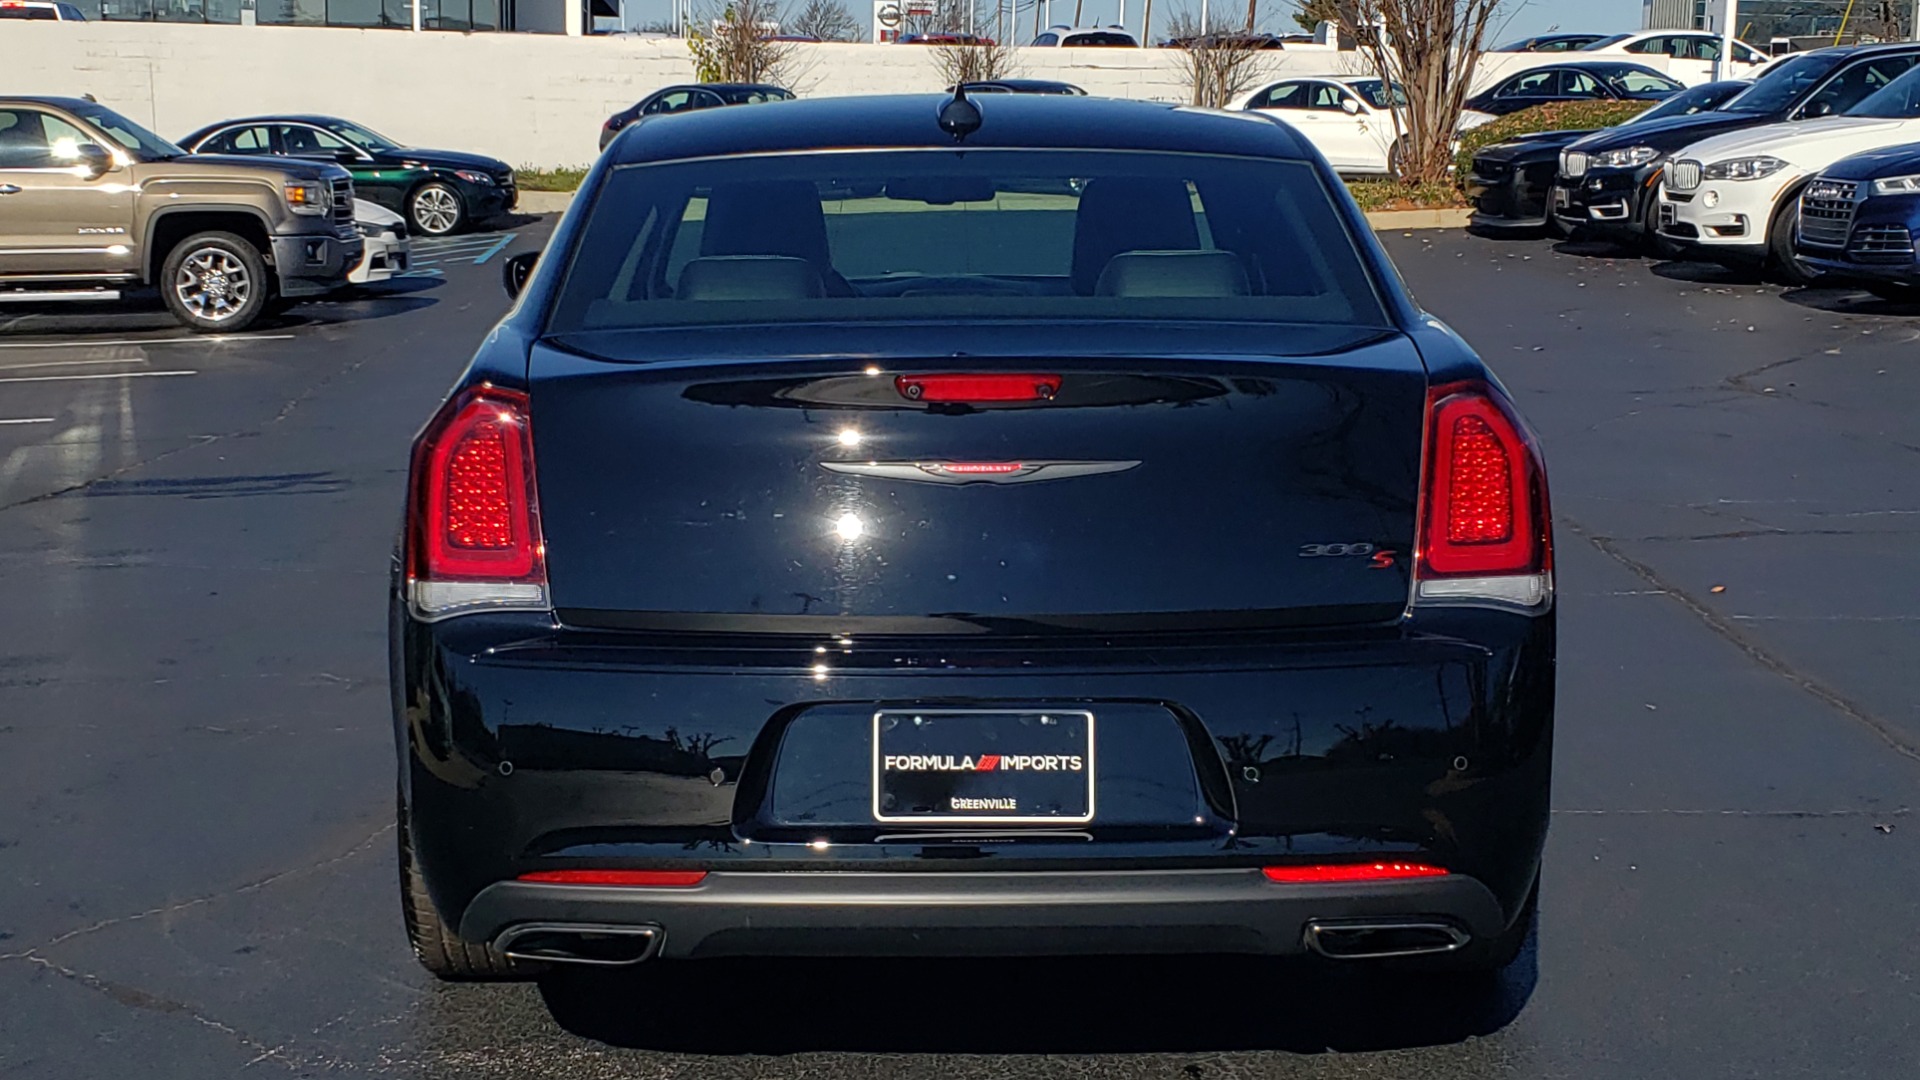 Used 2021 Chrysler 300 S 3.6L SEDAN / AUTO / NAV / HTD STS / UCONNECT 8.4-IN DISPLAY / REARVIEW for sale $34,695 at Formula Imports in Charlotte NC 28227 25